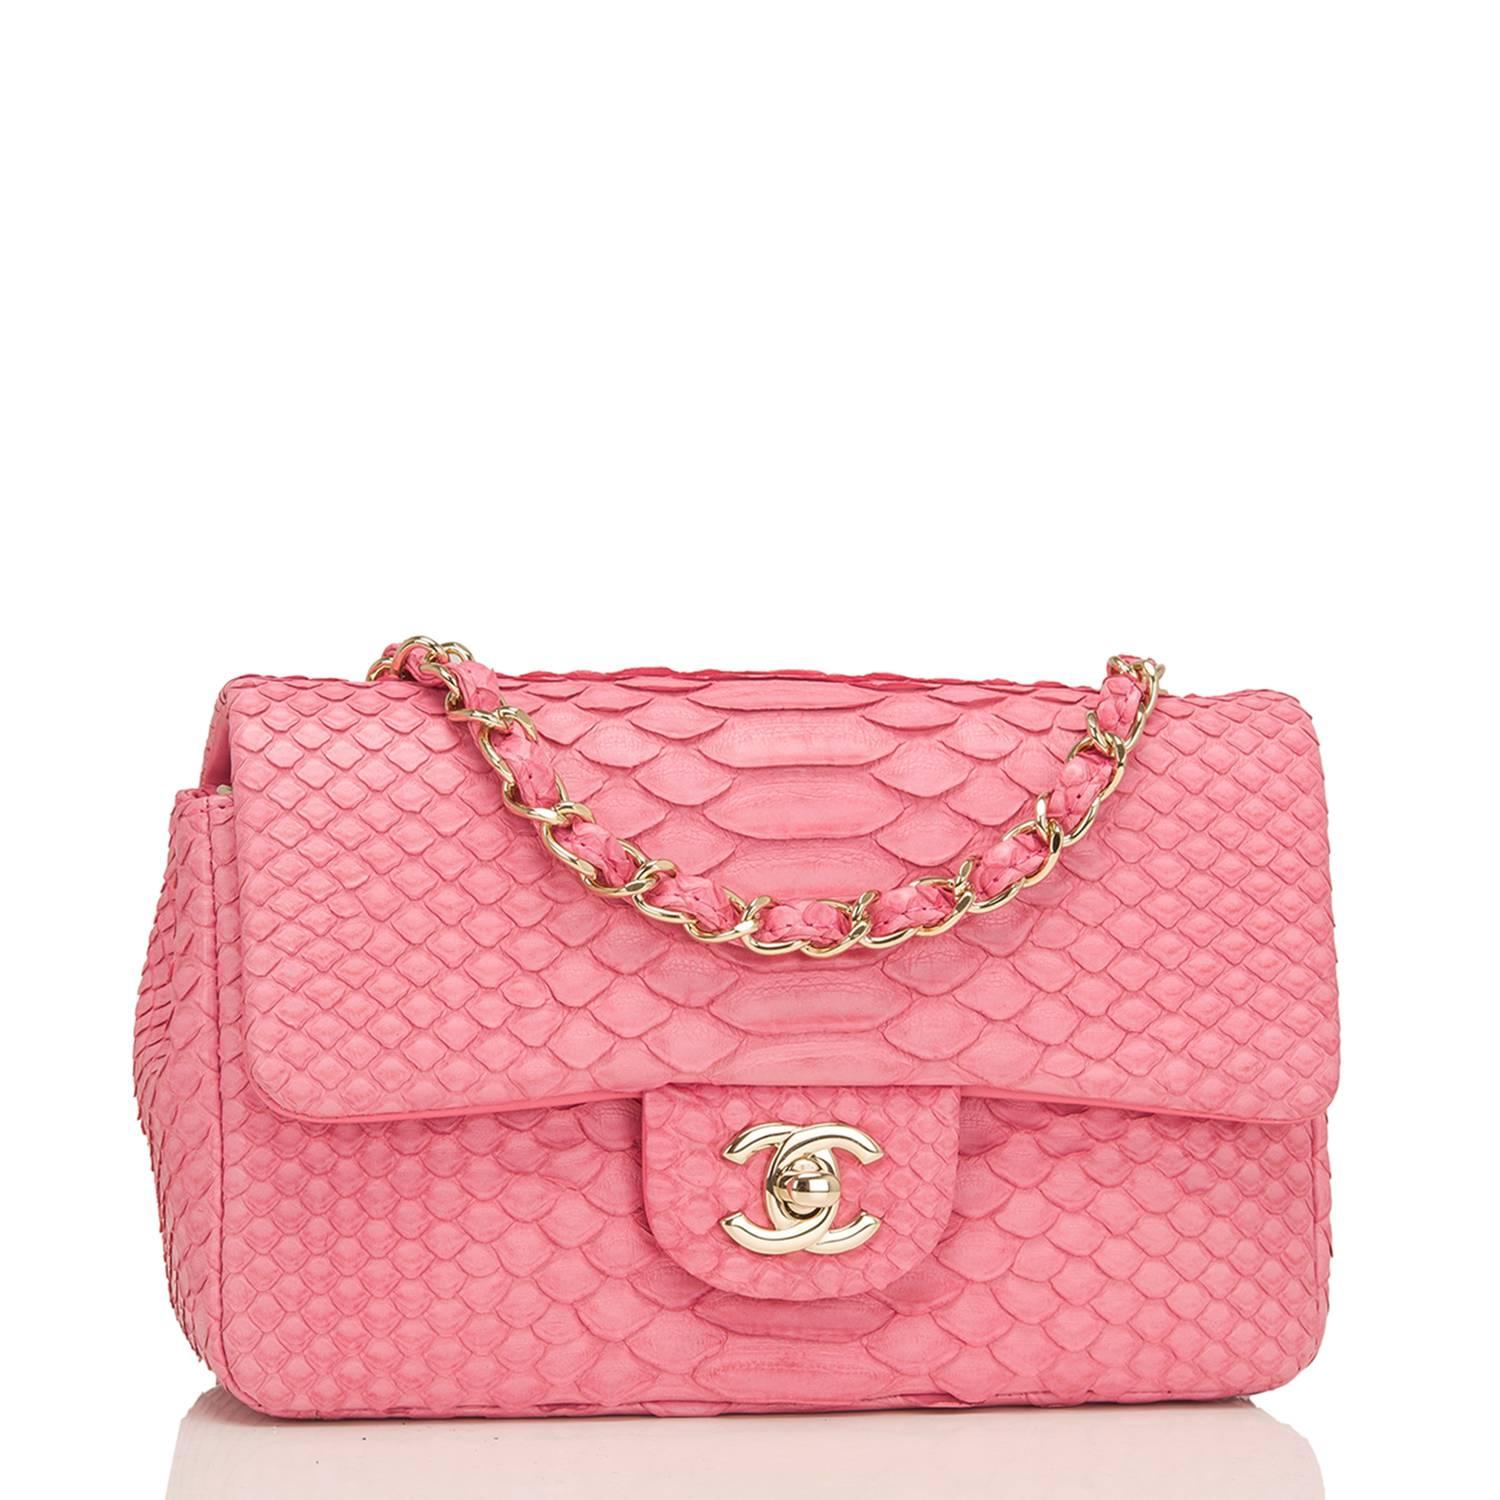 Chanel Rectangular Mini Classic flap bag of pink python with gold tone hardware.

This bag has a front flap with signature CC turnlock closure, rear half moon pocket and single interwoven pink leather and gold tone chain link shoulder/crossbody